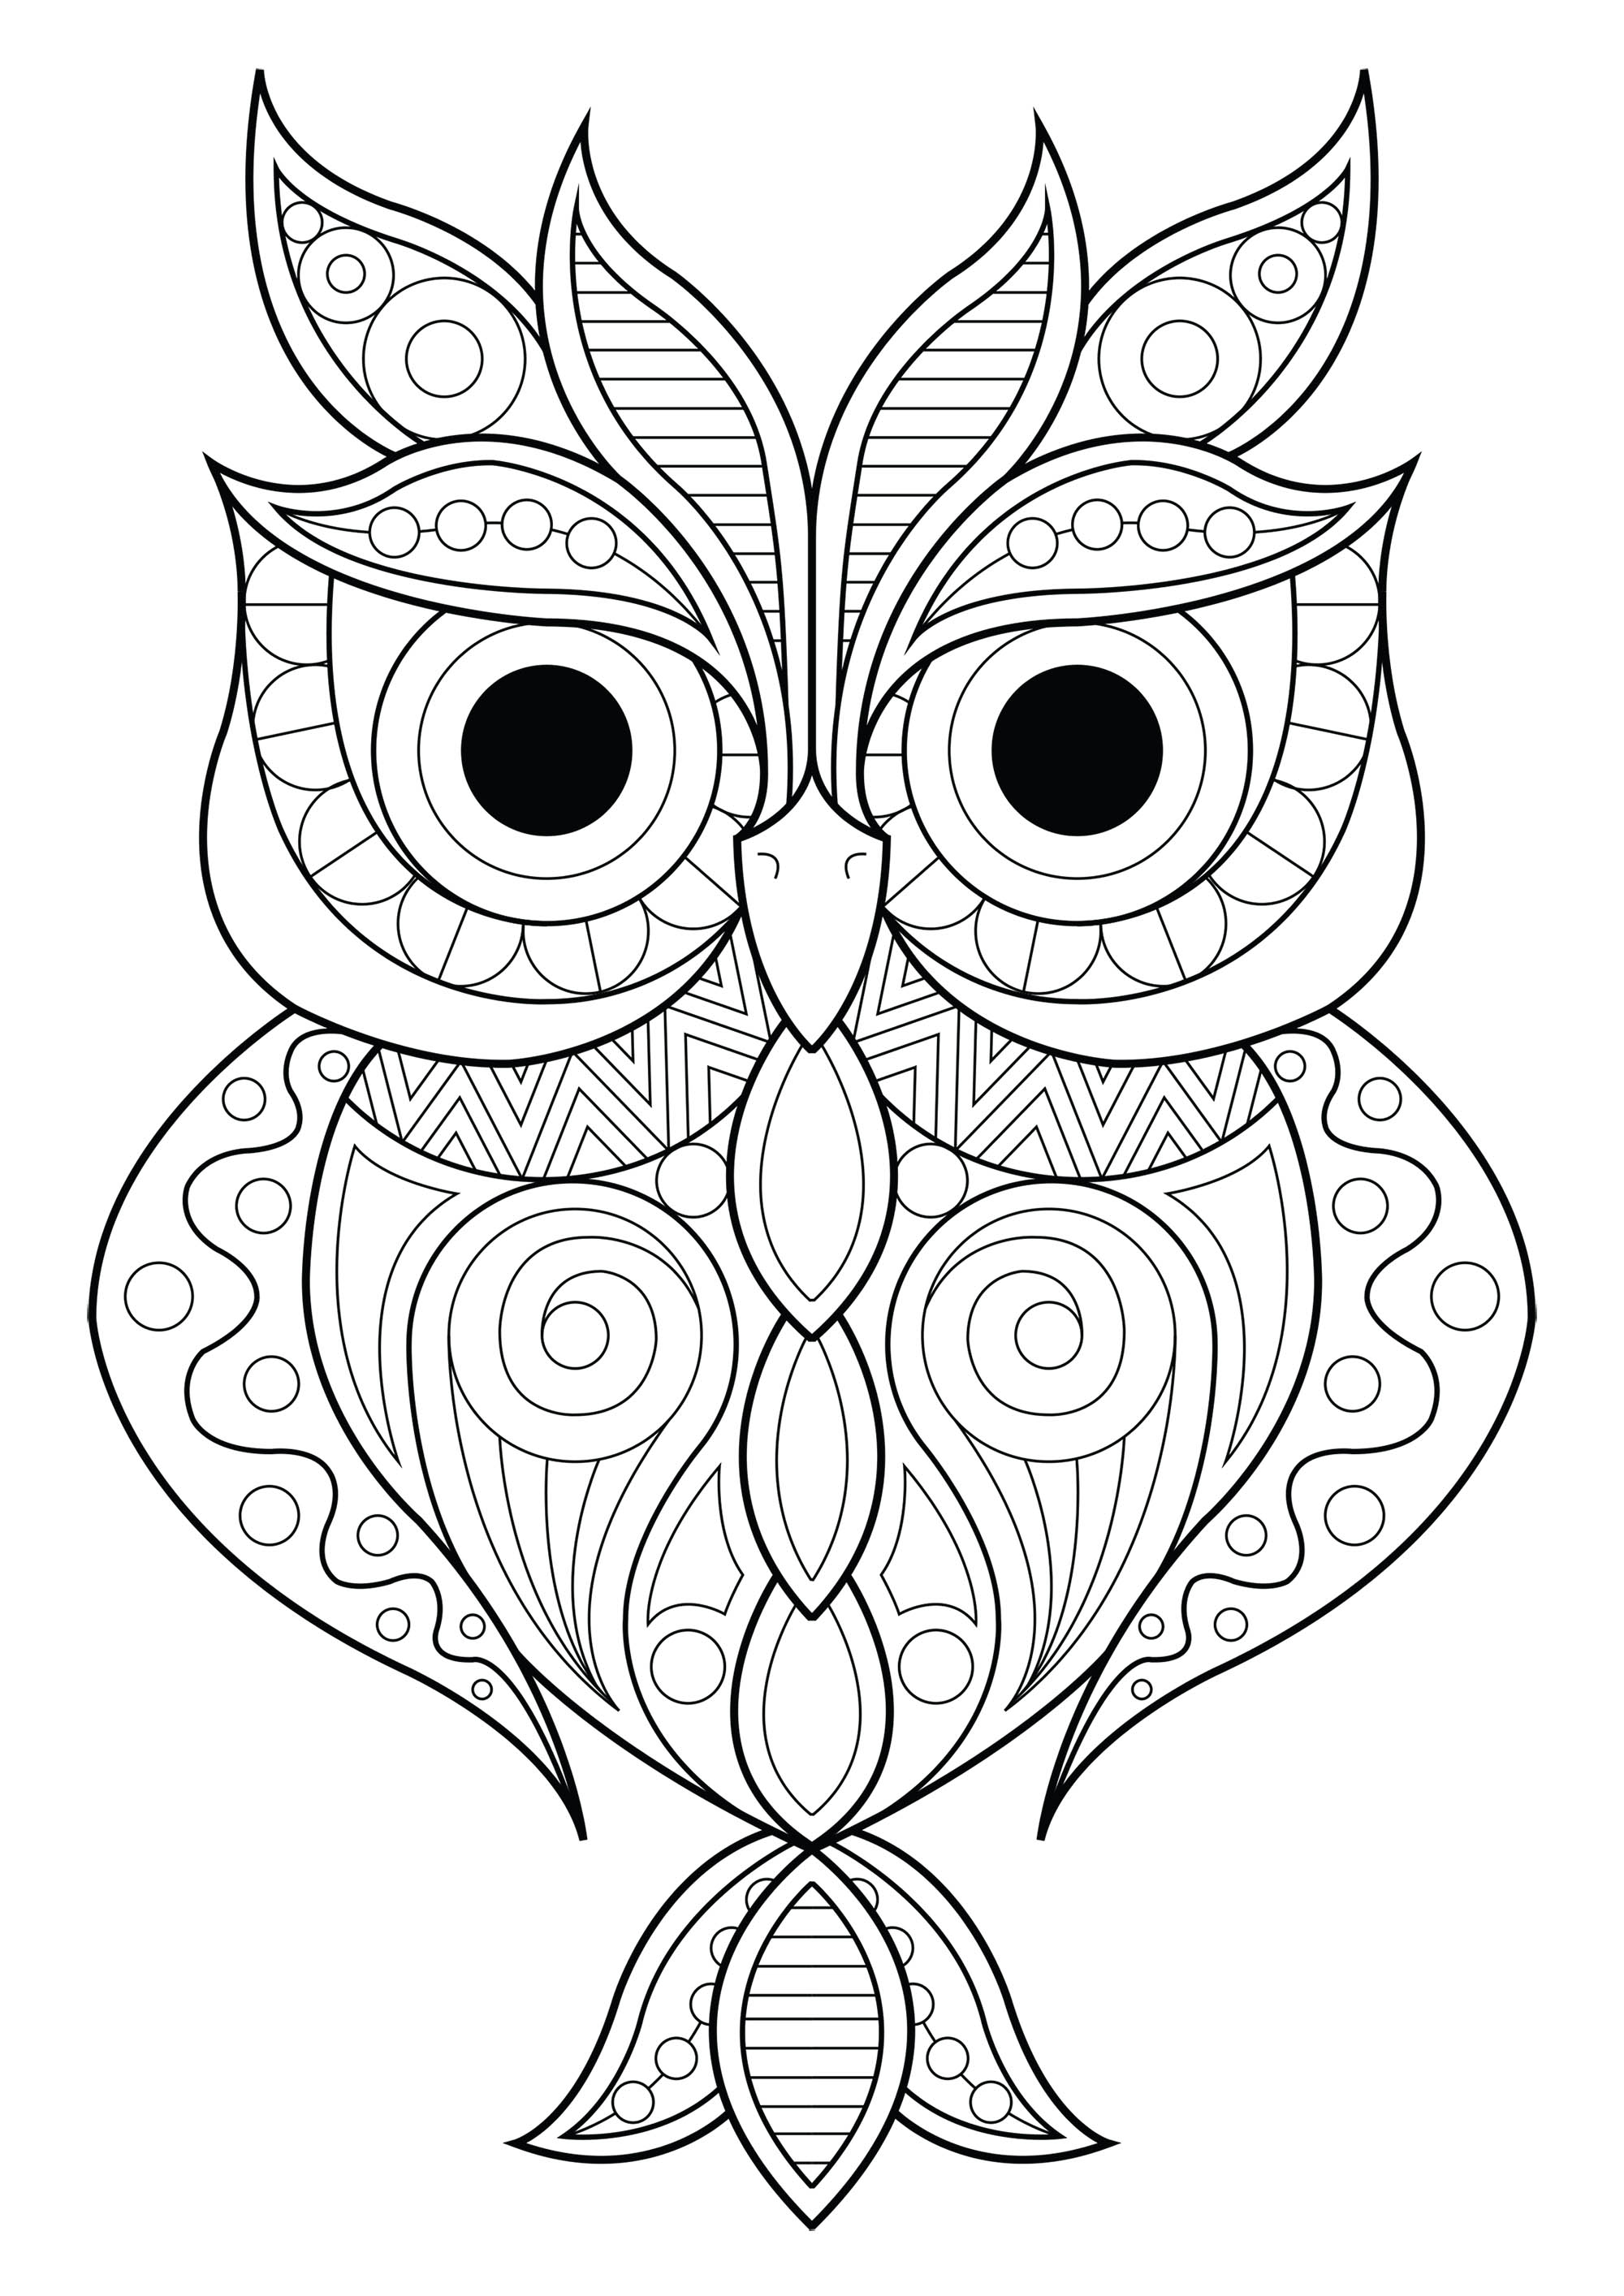 Owl simple patterns 2   Owls Adult Coloring Pages